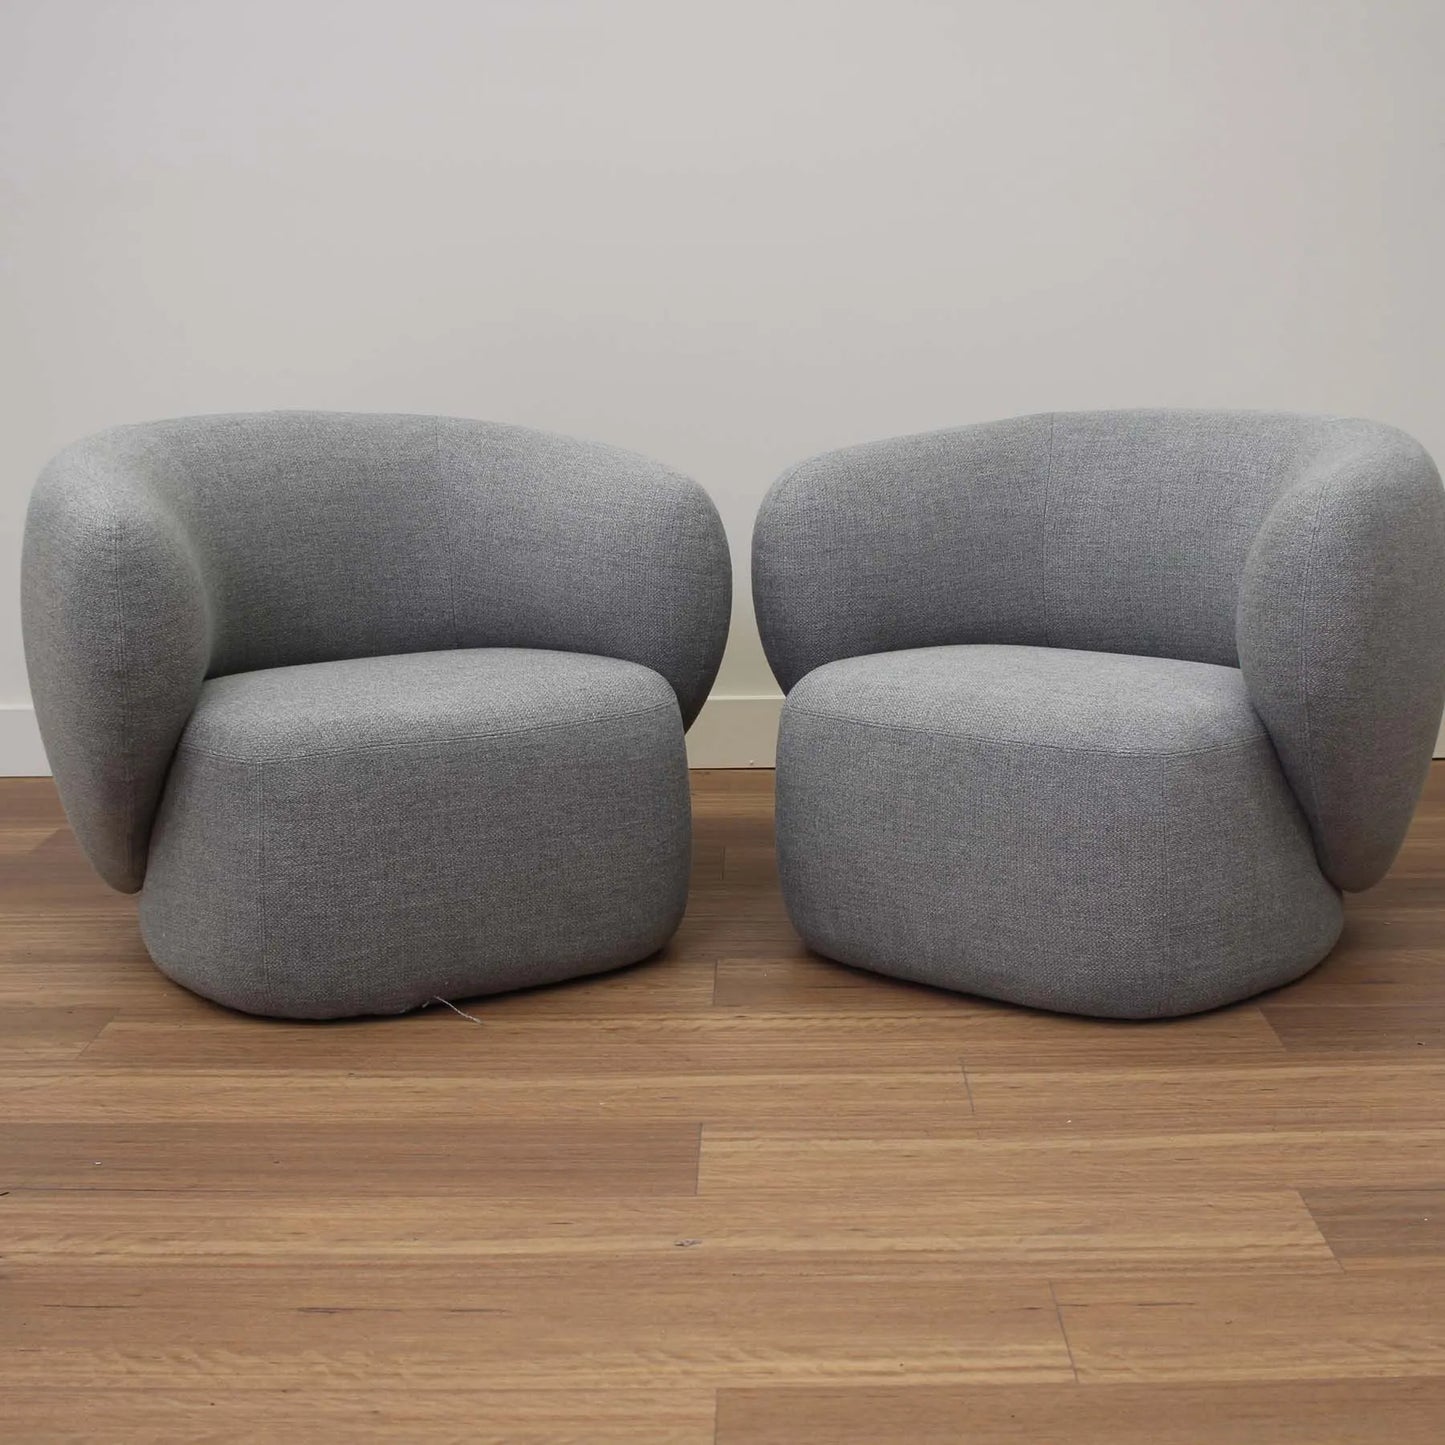 The Trove | Set of Two Swell Armchair - Novatex Cloud